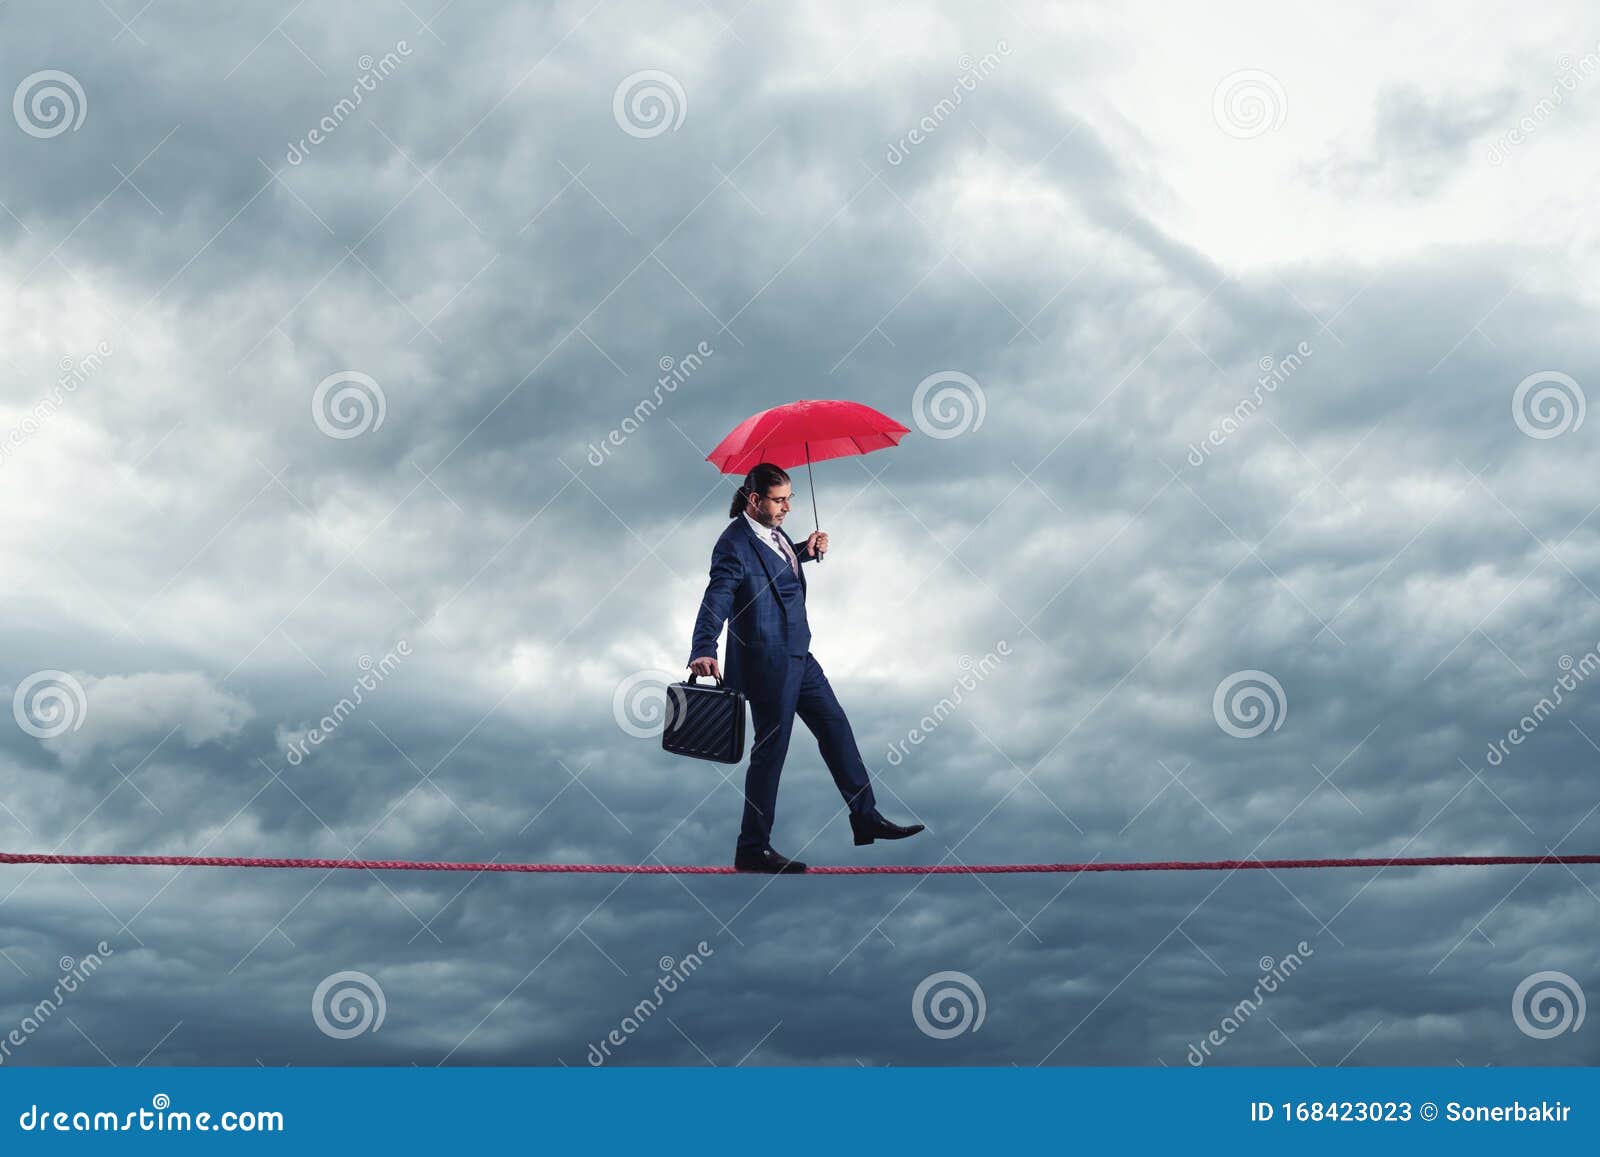 businessman is walking on a thiny rope, metaphoring risky business life an capability of solving problems in balance.